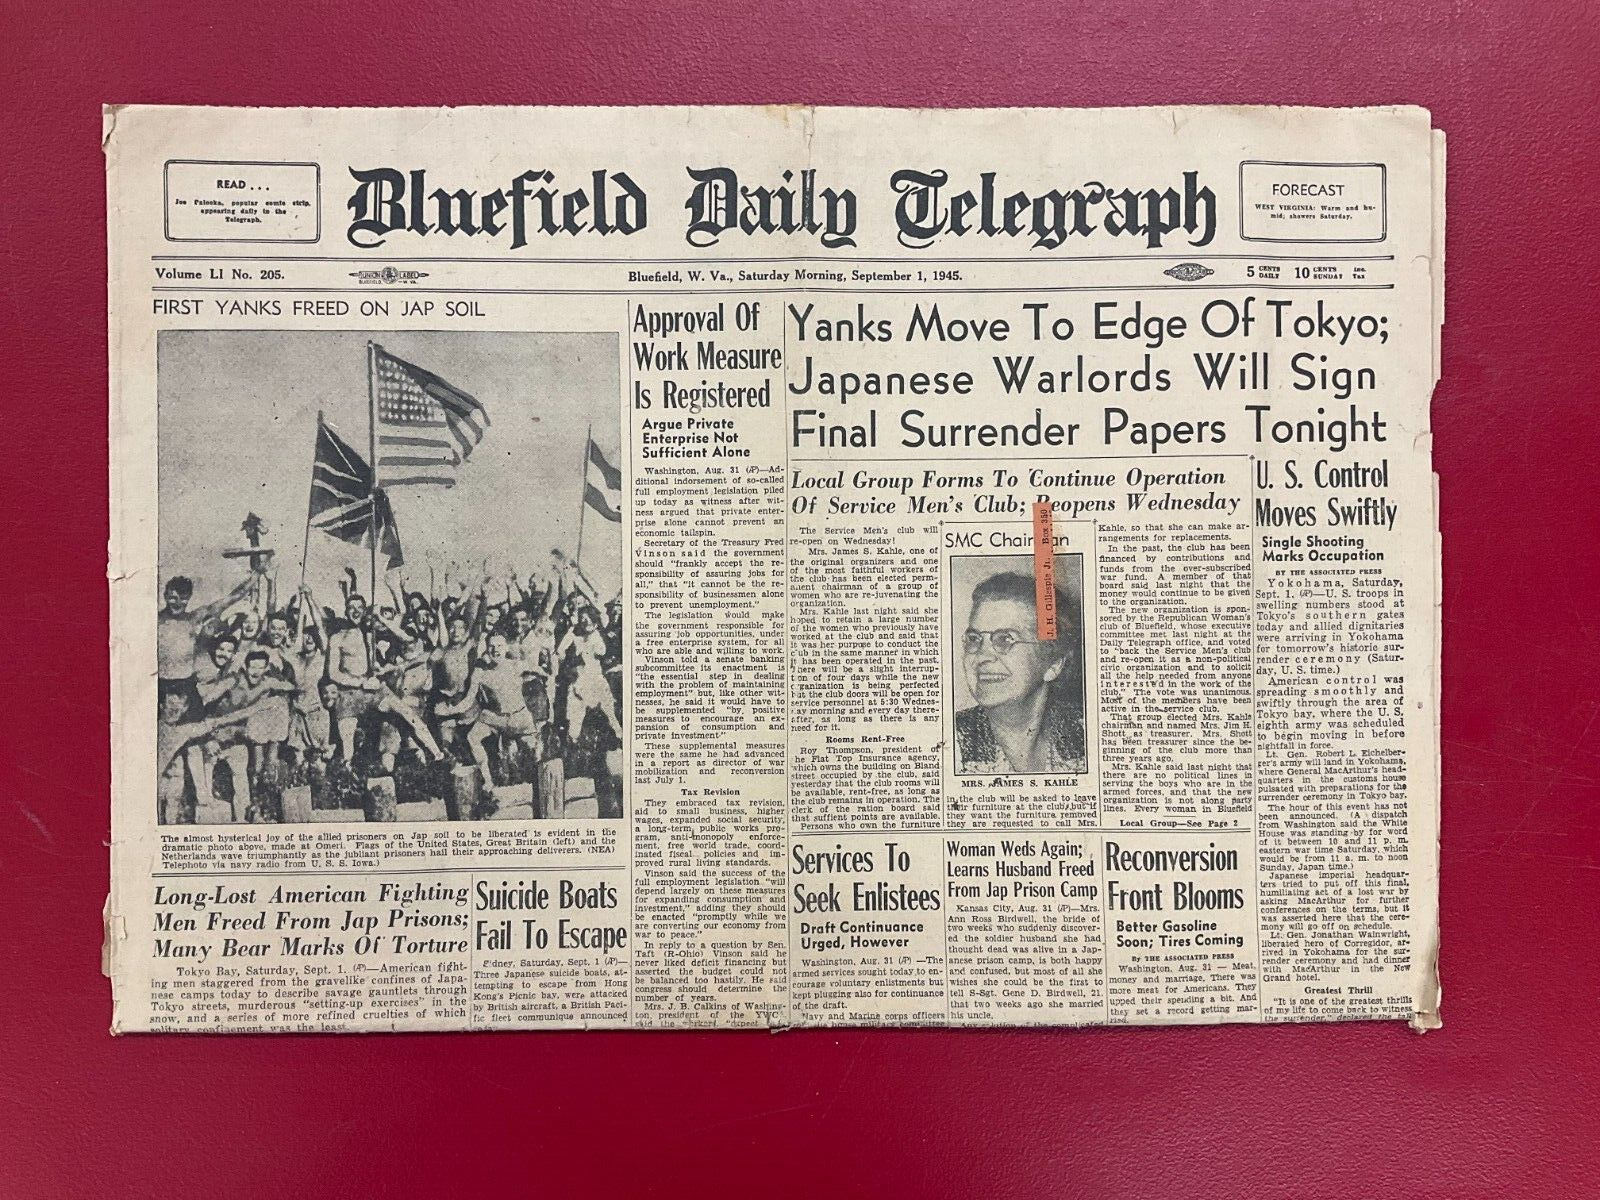 Bluefield Daily Telegraph September 1, 1945 - Yanks Move to Edge of Tokyo